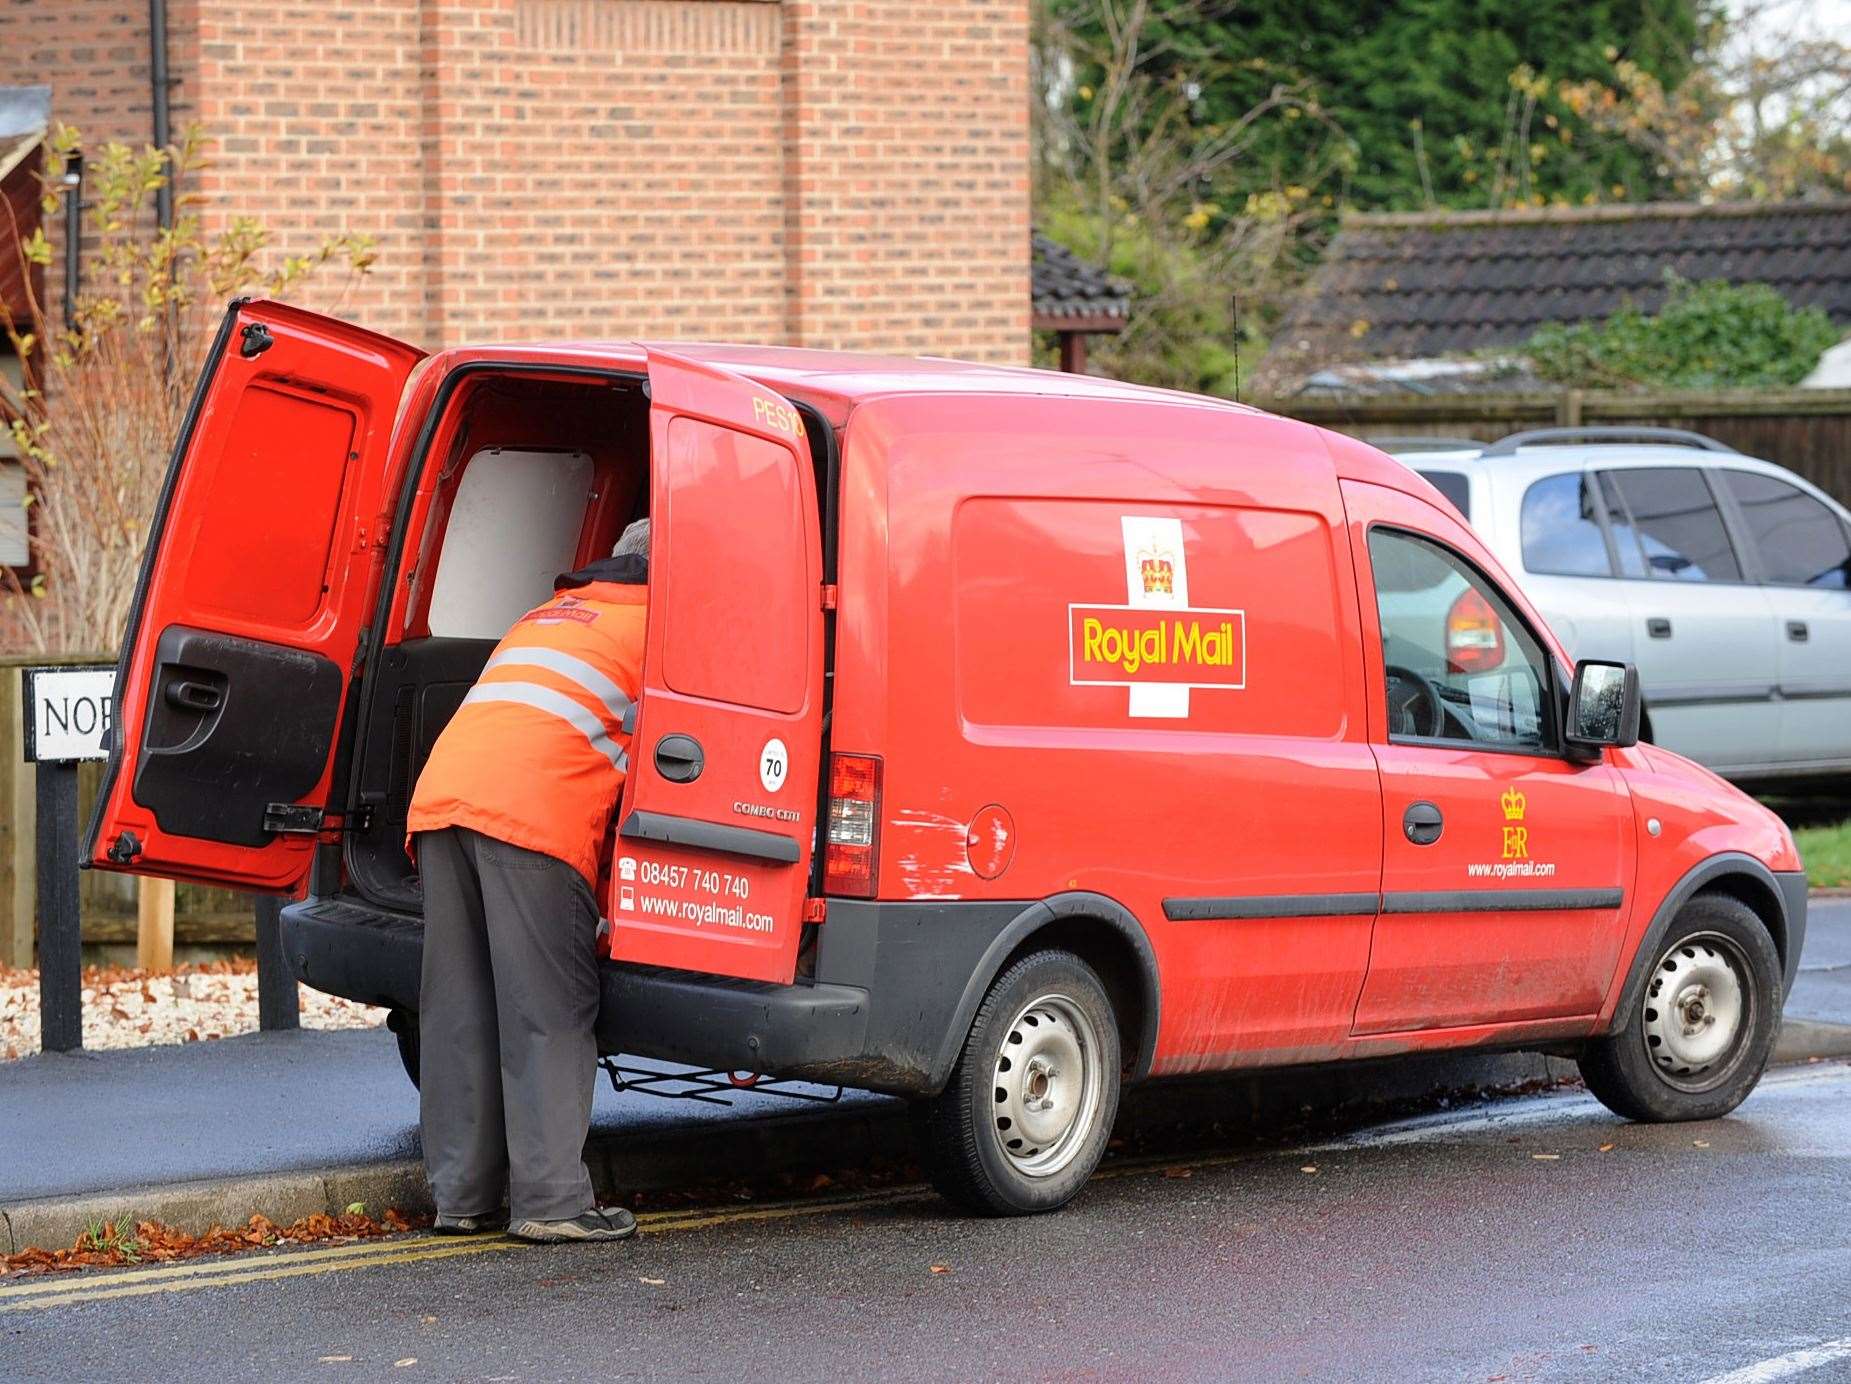 Royal Mail says it is having difficulties with staffing levels